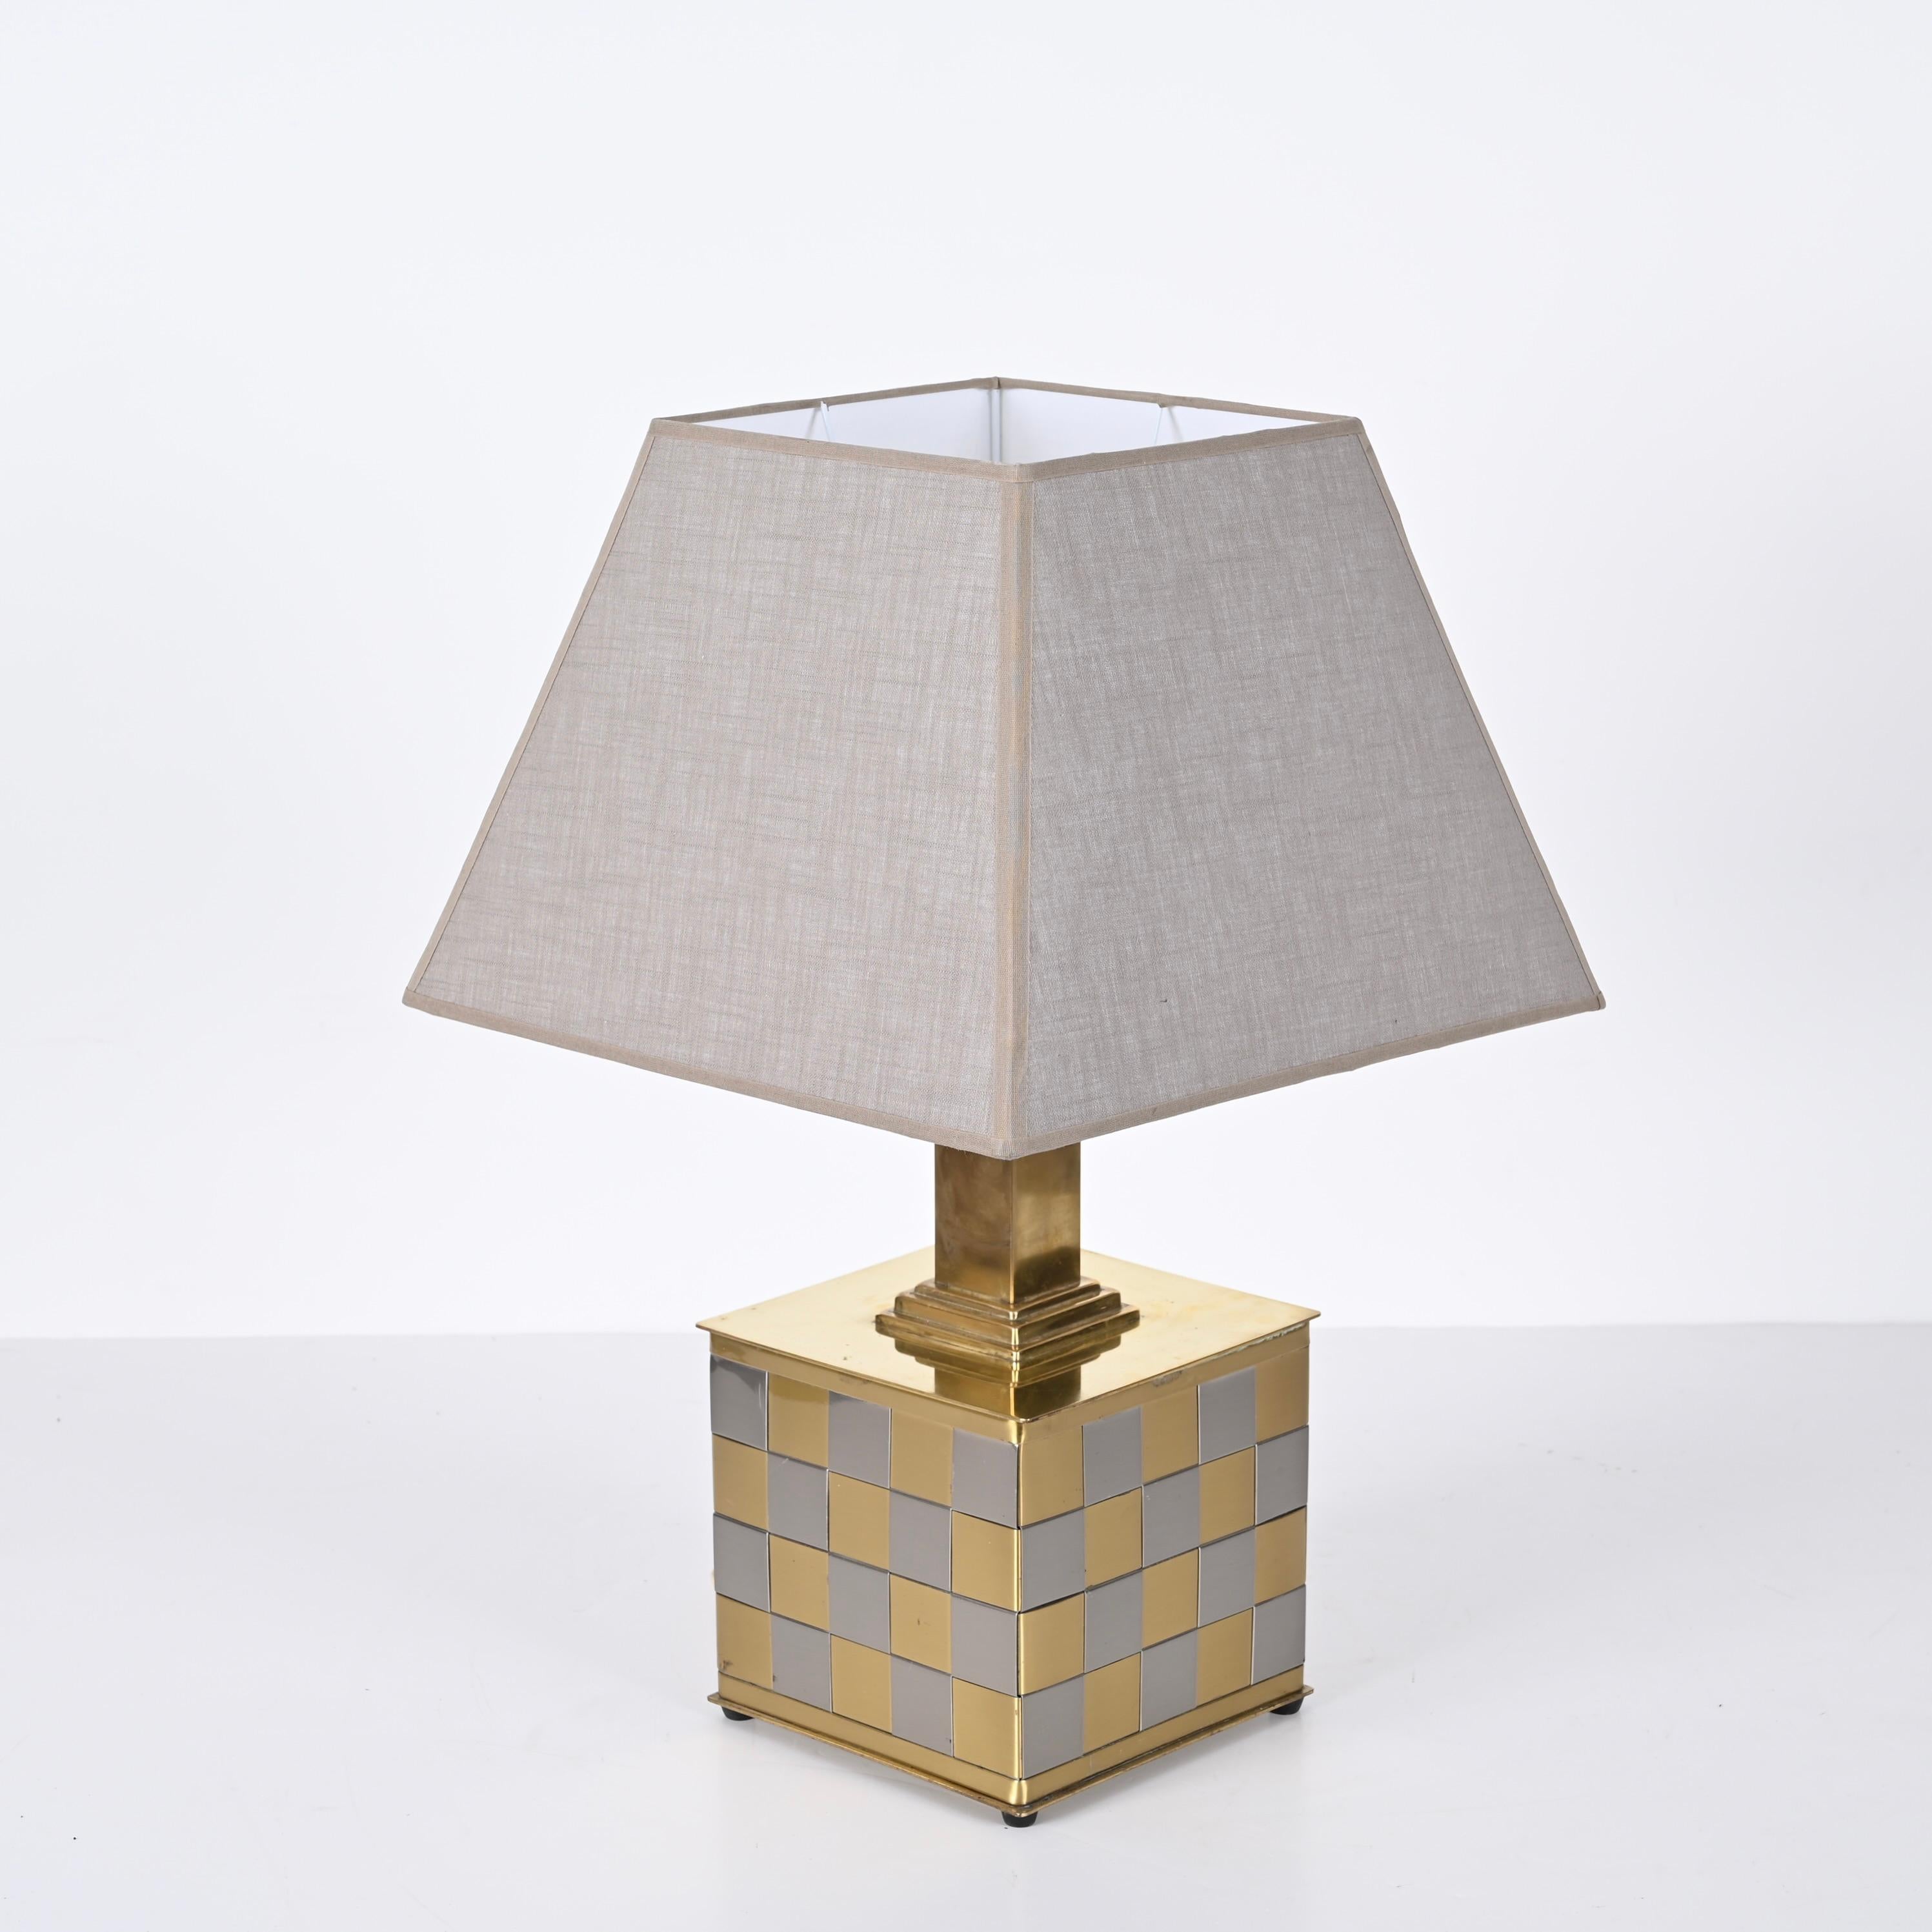 Stunning cube shaped table lamp in brass and chrome braid, this wonderful item was designed in the Italy in the 70s in the style of Willy Rizzo.
The contrast between the brass and the chrome is simply amazing and enriches the light refraction.

An